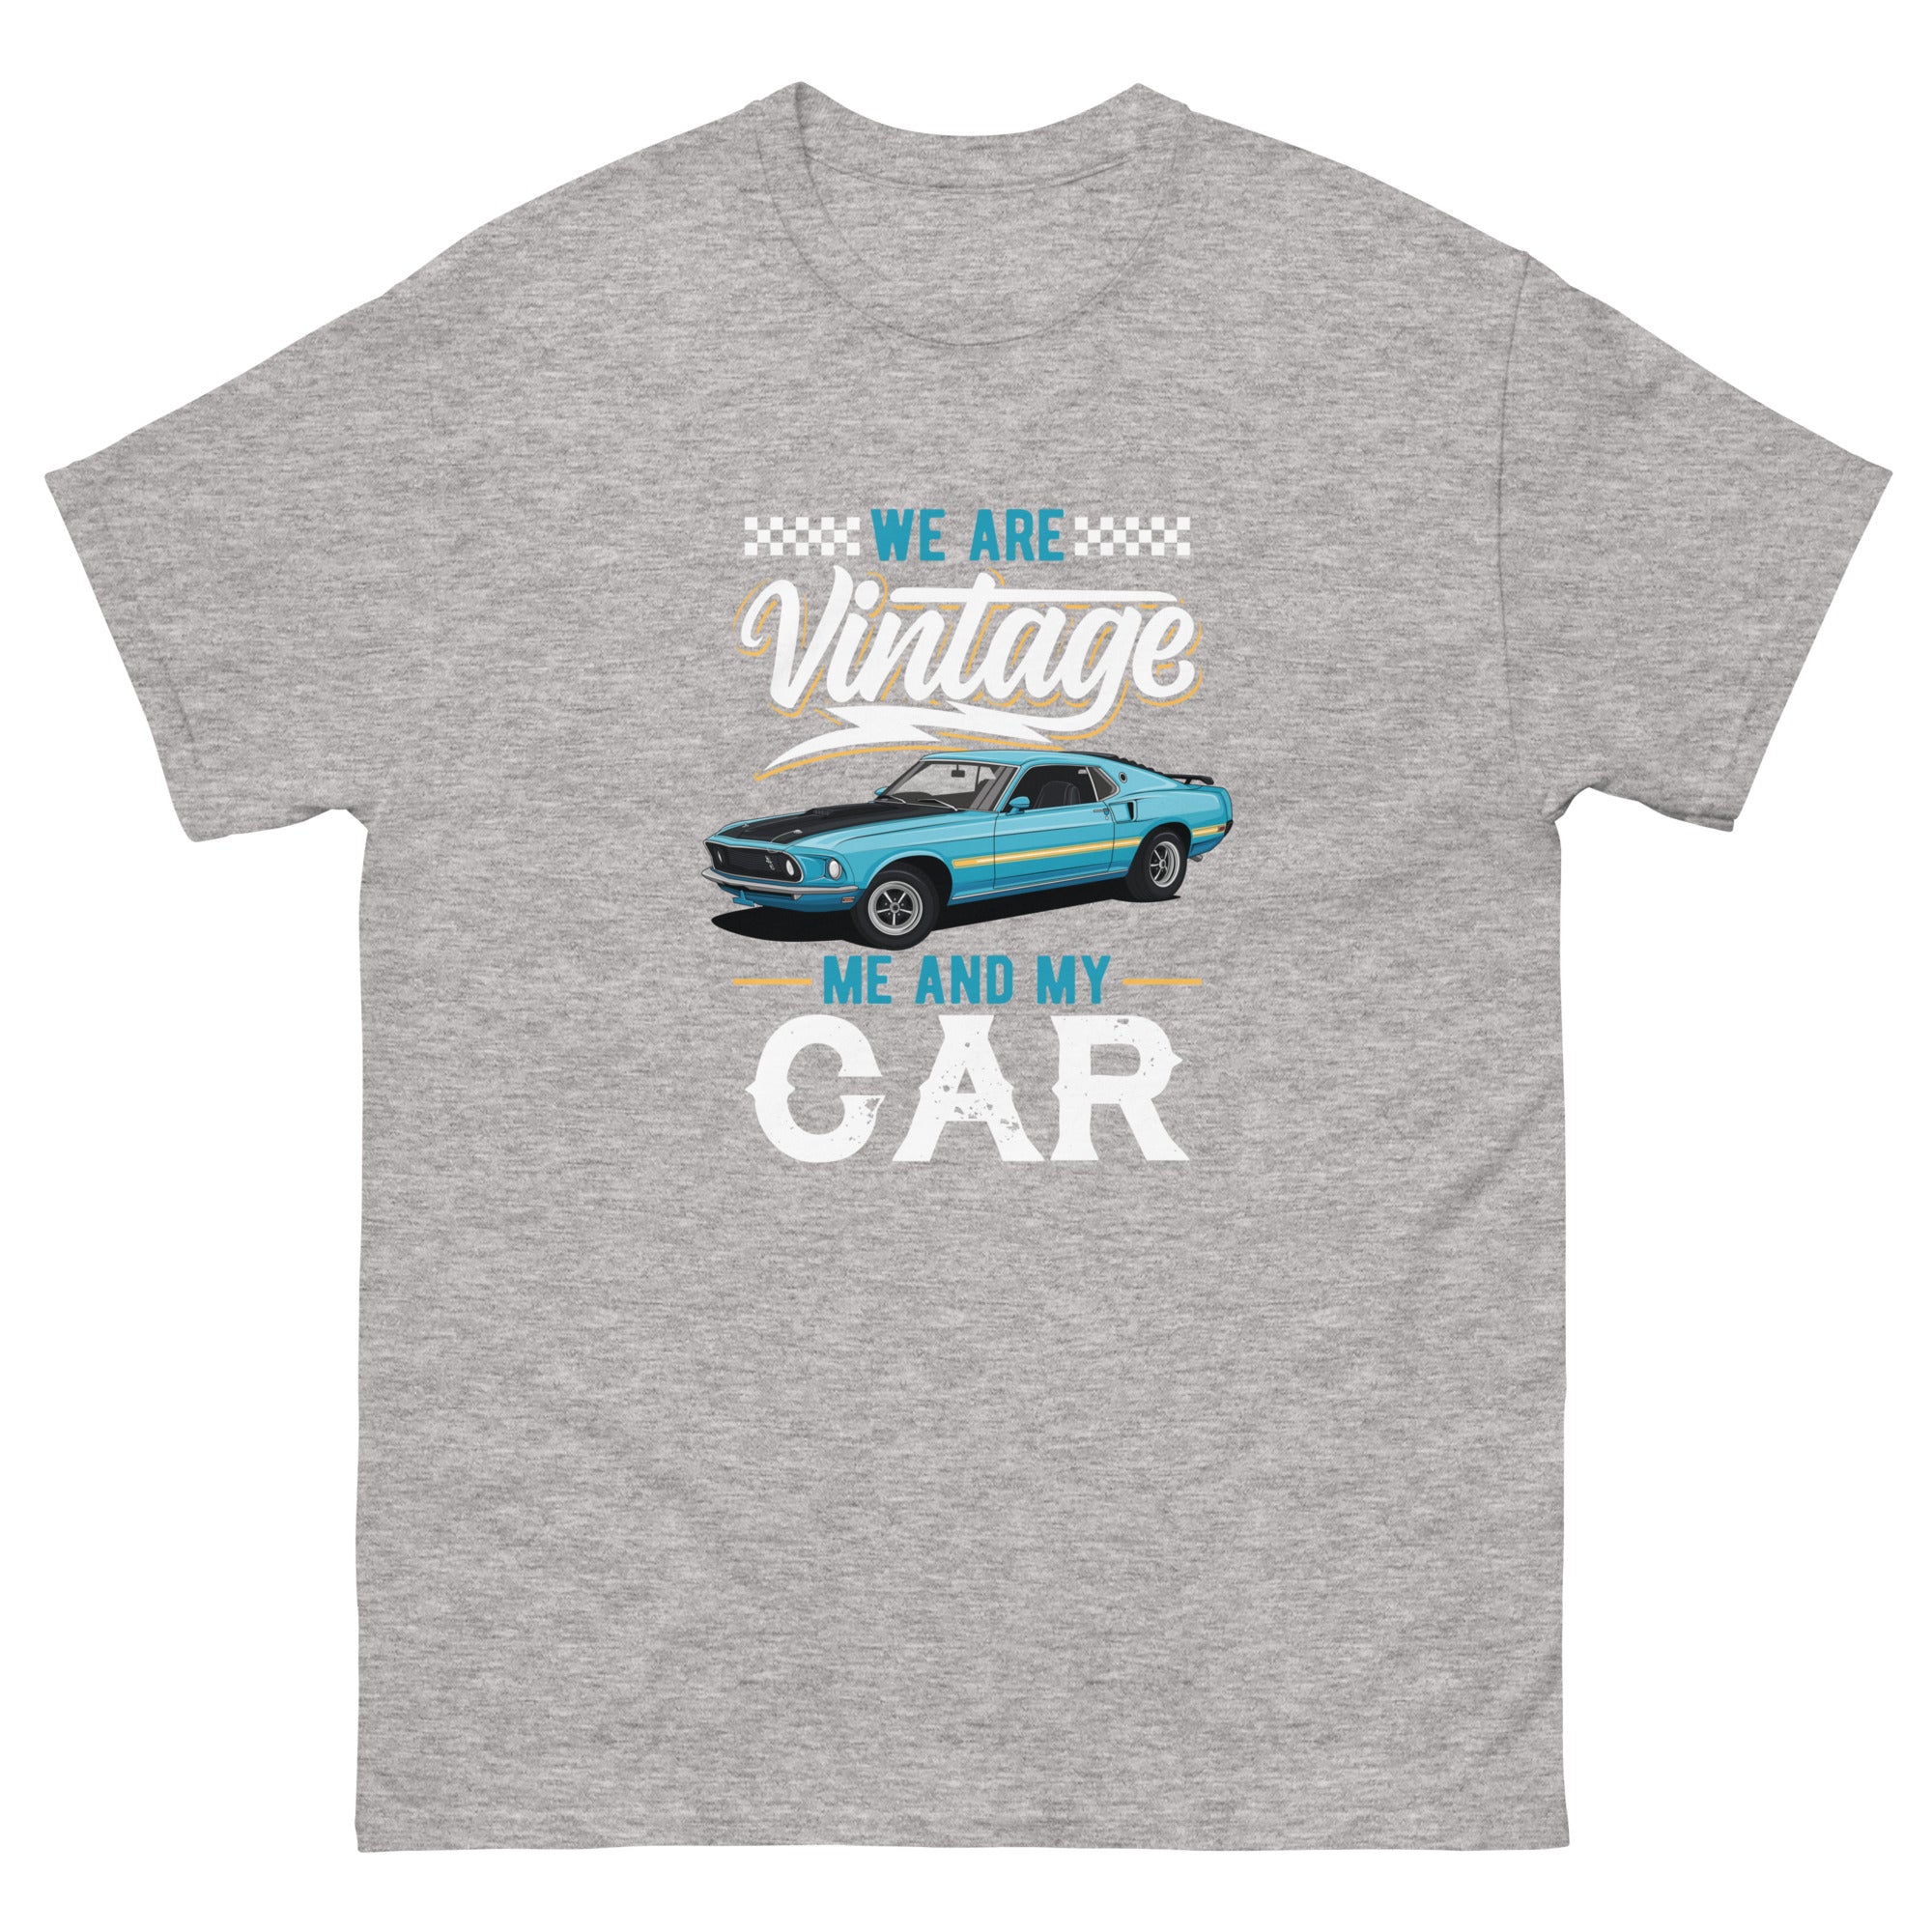 We are Vintage classic tee